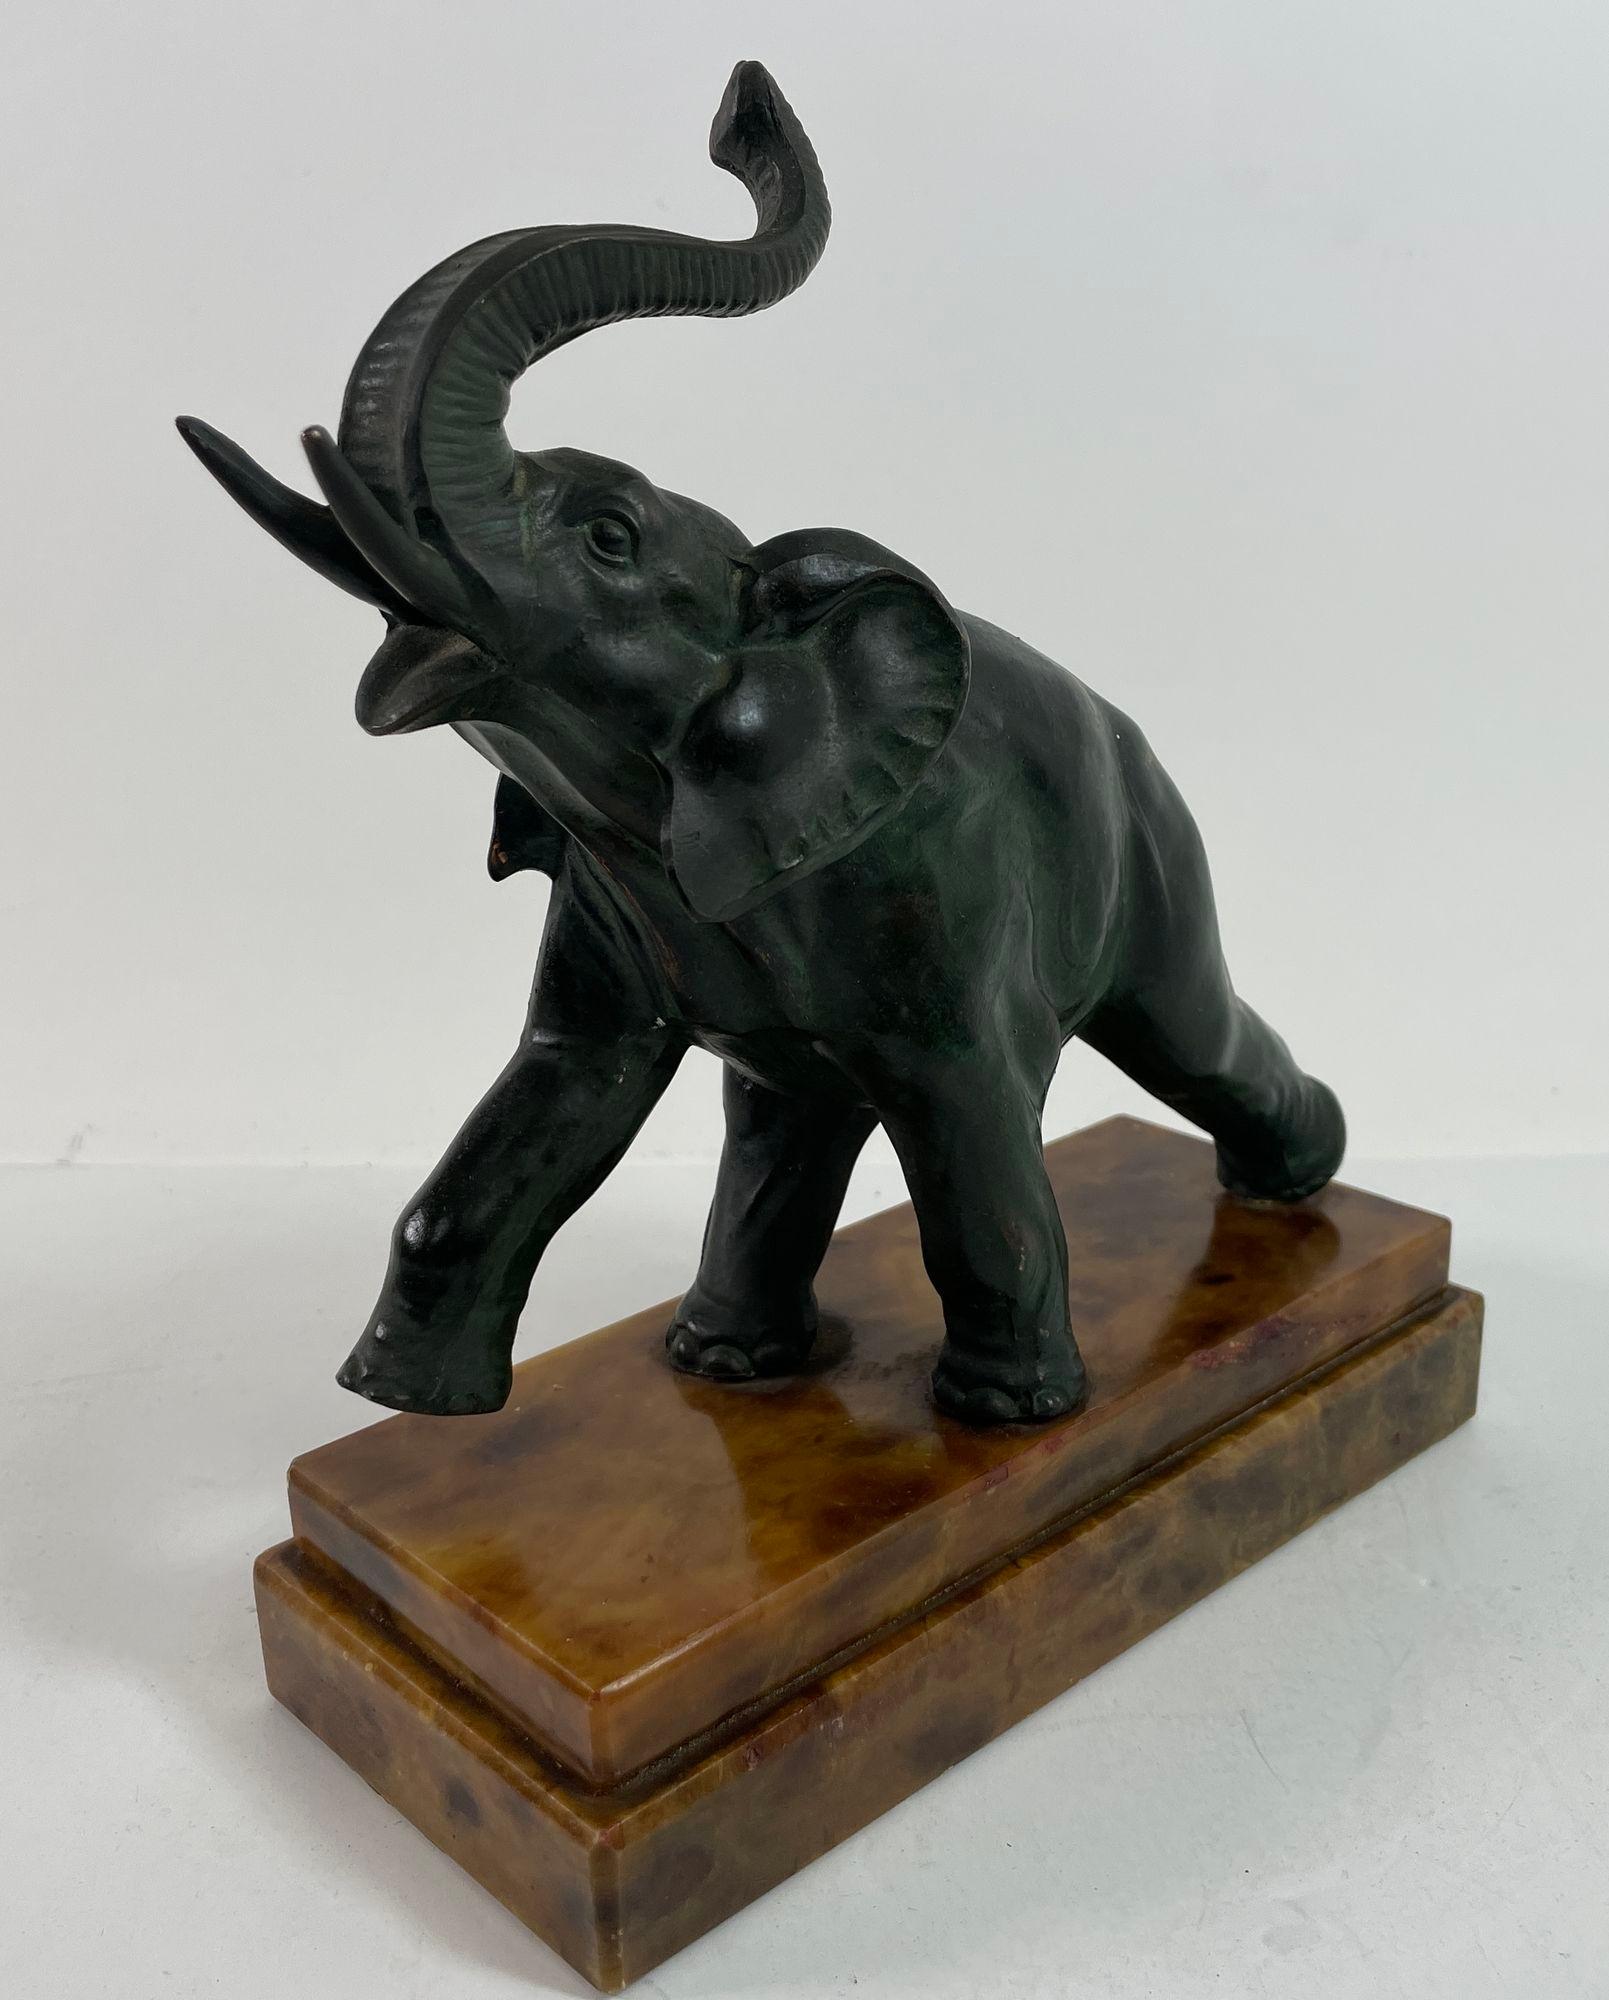 Art Deco Bronze Elephant Sculpture with Raised Trunk Made in Italy For Sale 1